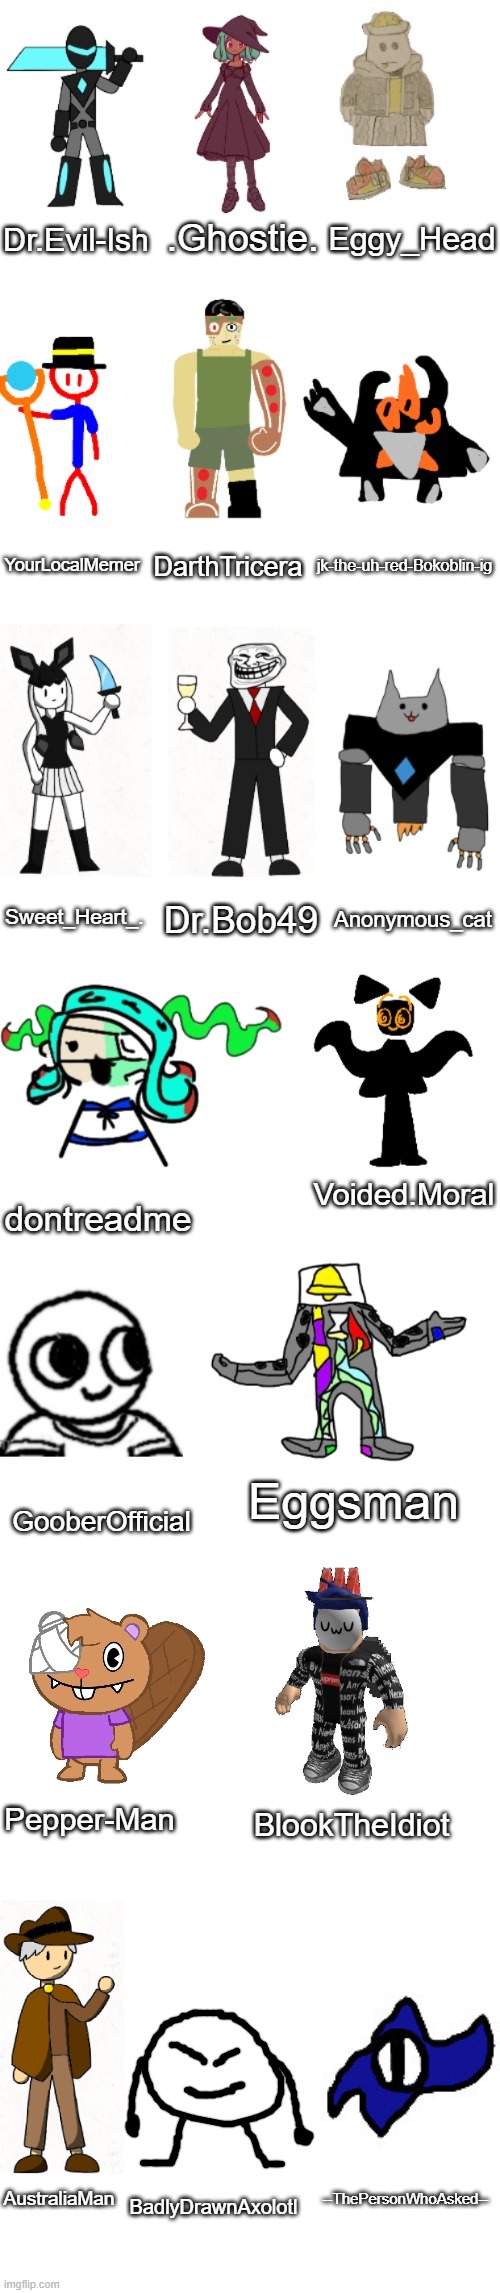 Characters matched to the users who made them | .Ghostie. Dr.Evil-Ish; Eggy_Head; YourLocalMemer; DarthTricera; jk-the-uh-red-Bokoblin-ig; Sweet_Heart_. Dr.Bob49; Anonymous_cat; Voided.Moral; dontreadme; Eggsman; GooberOfficial; BlookTheIdiot; Pepper-Man; AustraliaMan; --ThePersonWhoAsked--; BadlyDrawnAxolotl | image tagged in the most basic imgflip-bossfights oc list everrrrr | made w/ Imgflip meme maker